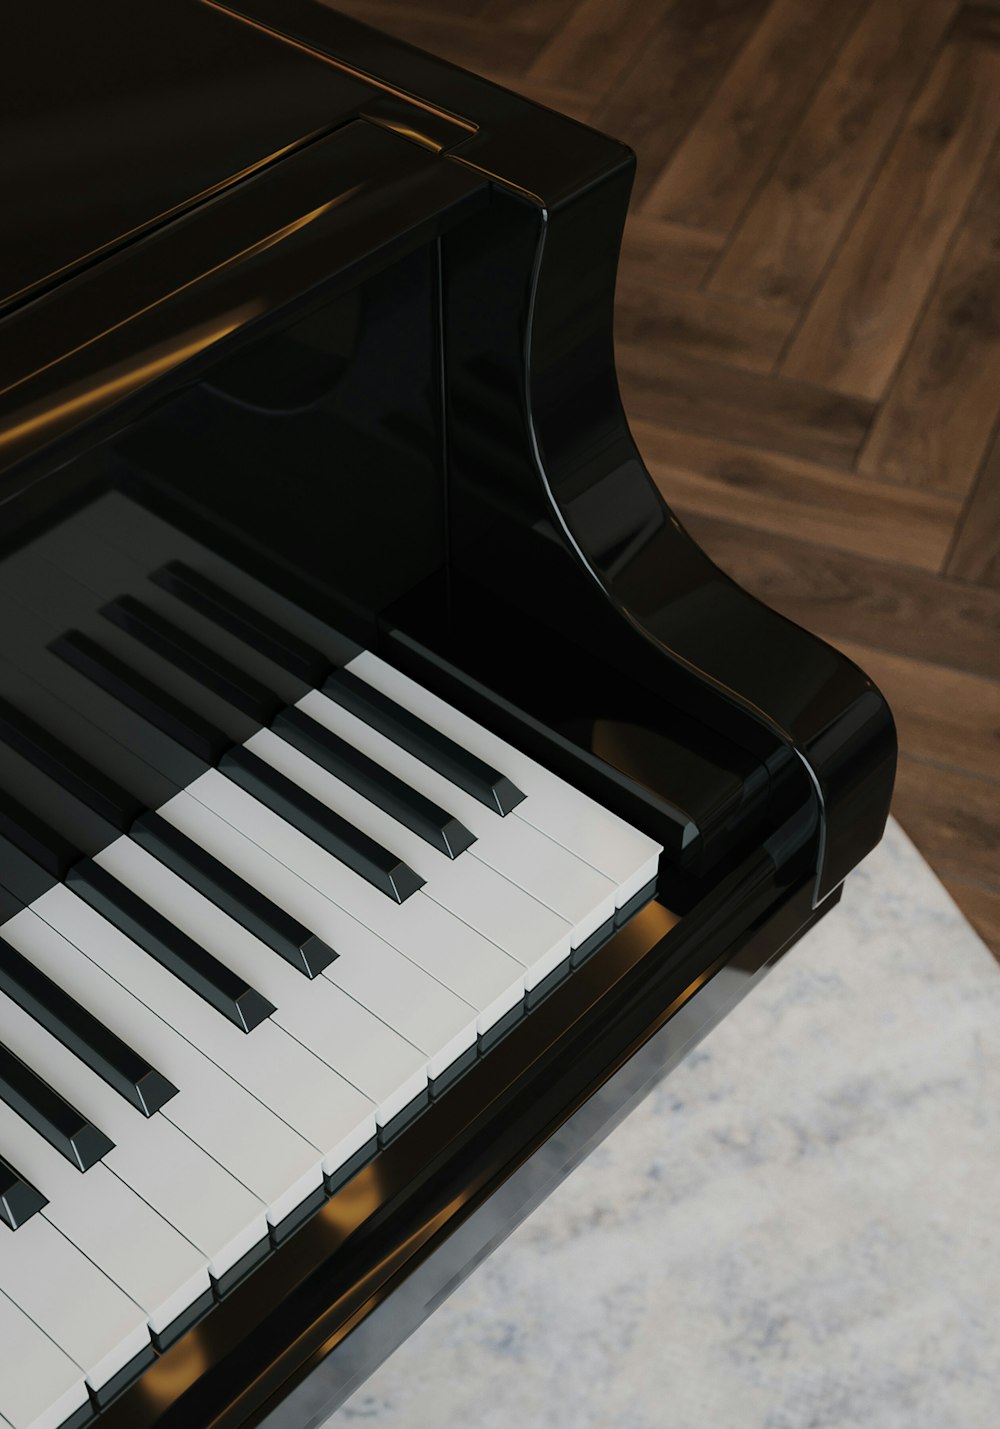 a close up of a piano on a wooden floor